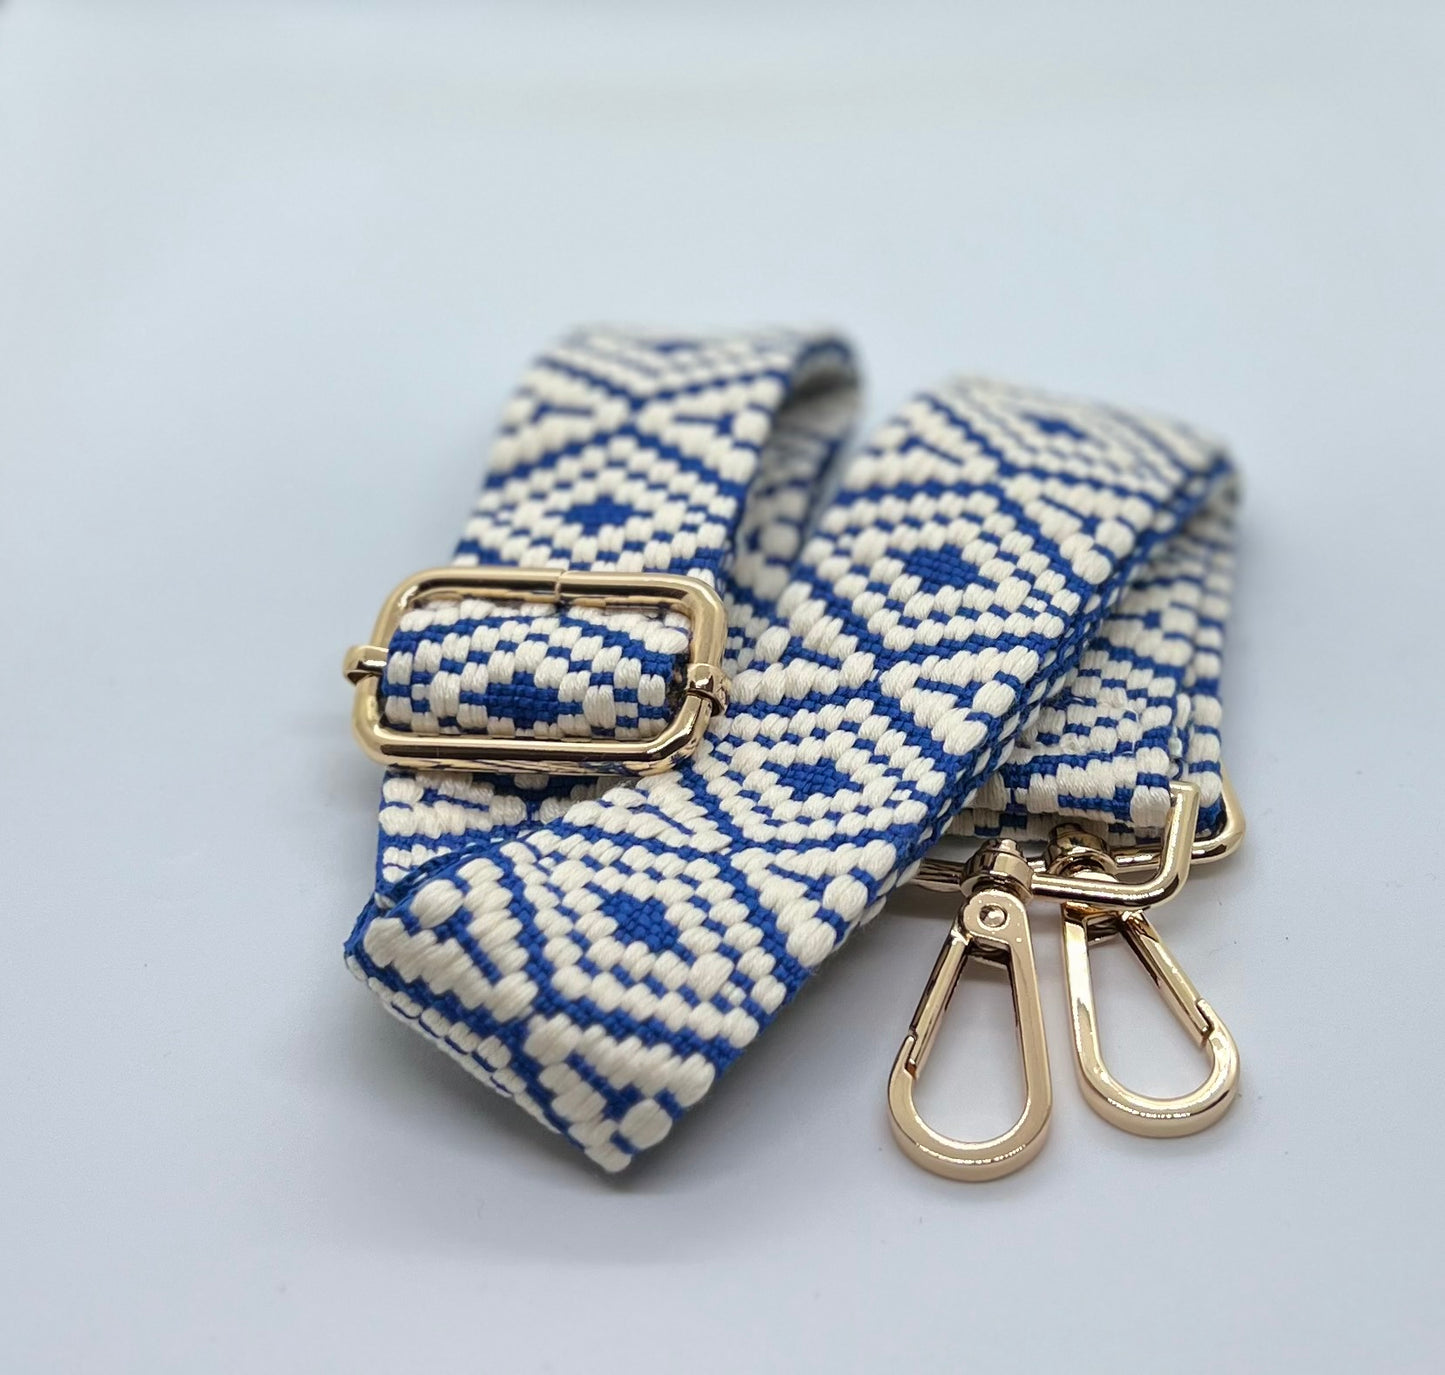 Blue and white woven diamond strap with gold hardware